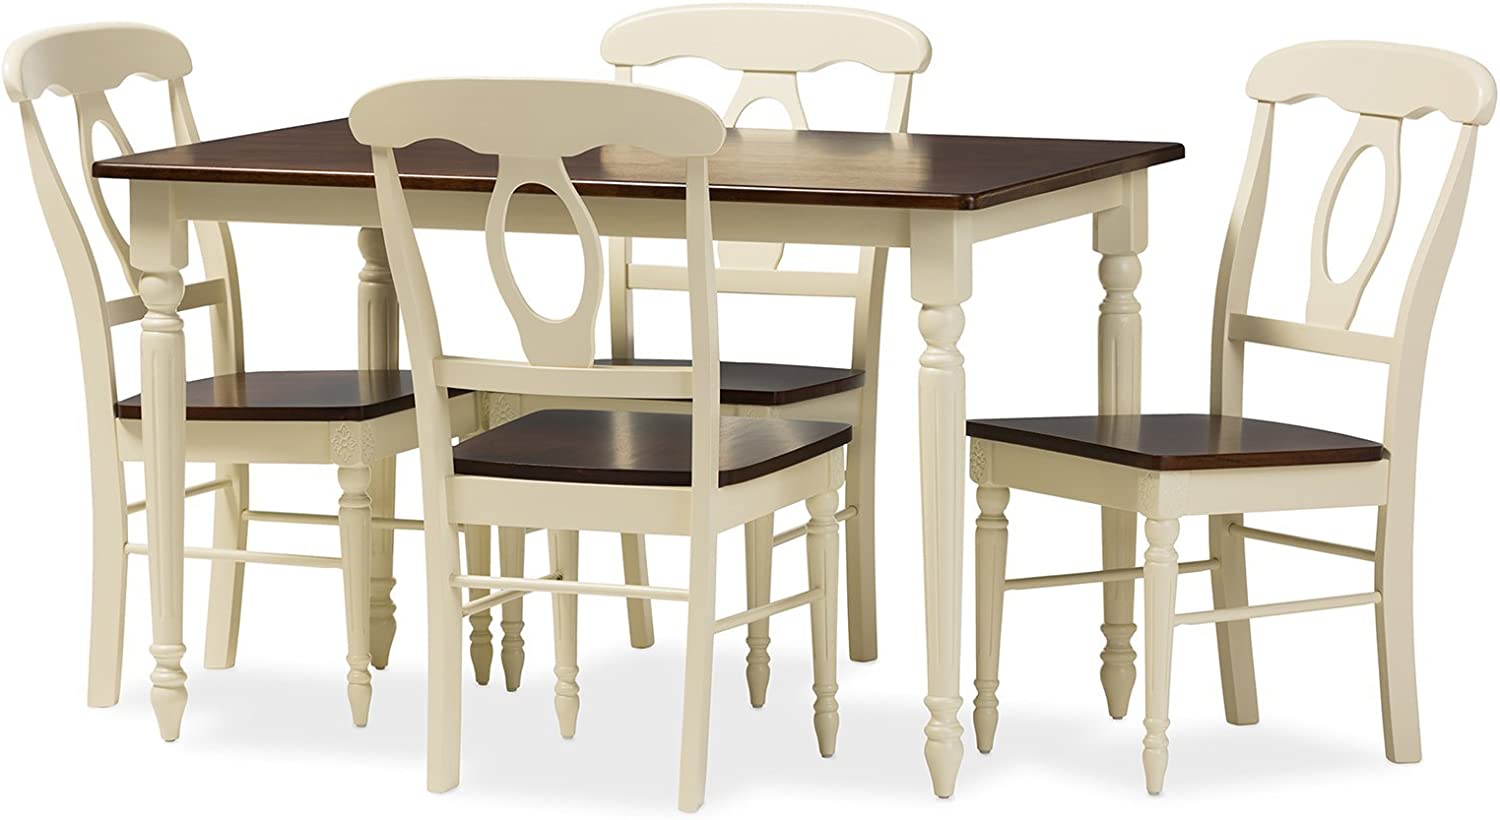 Baxton Studio Napoleon French Wood Dining Set Cherry Brown/Cream/French Country Cottage